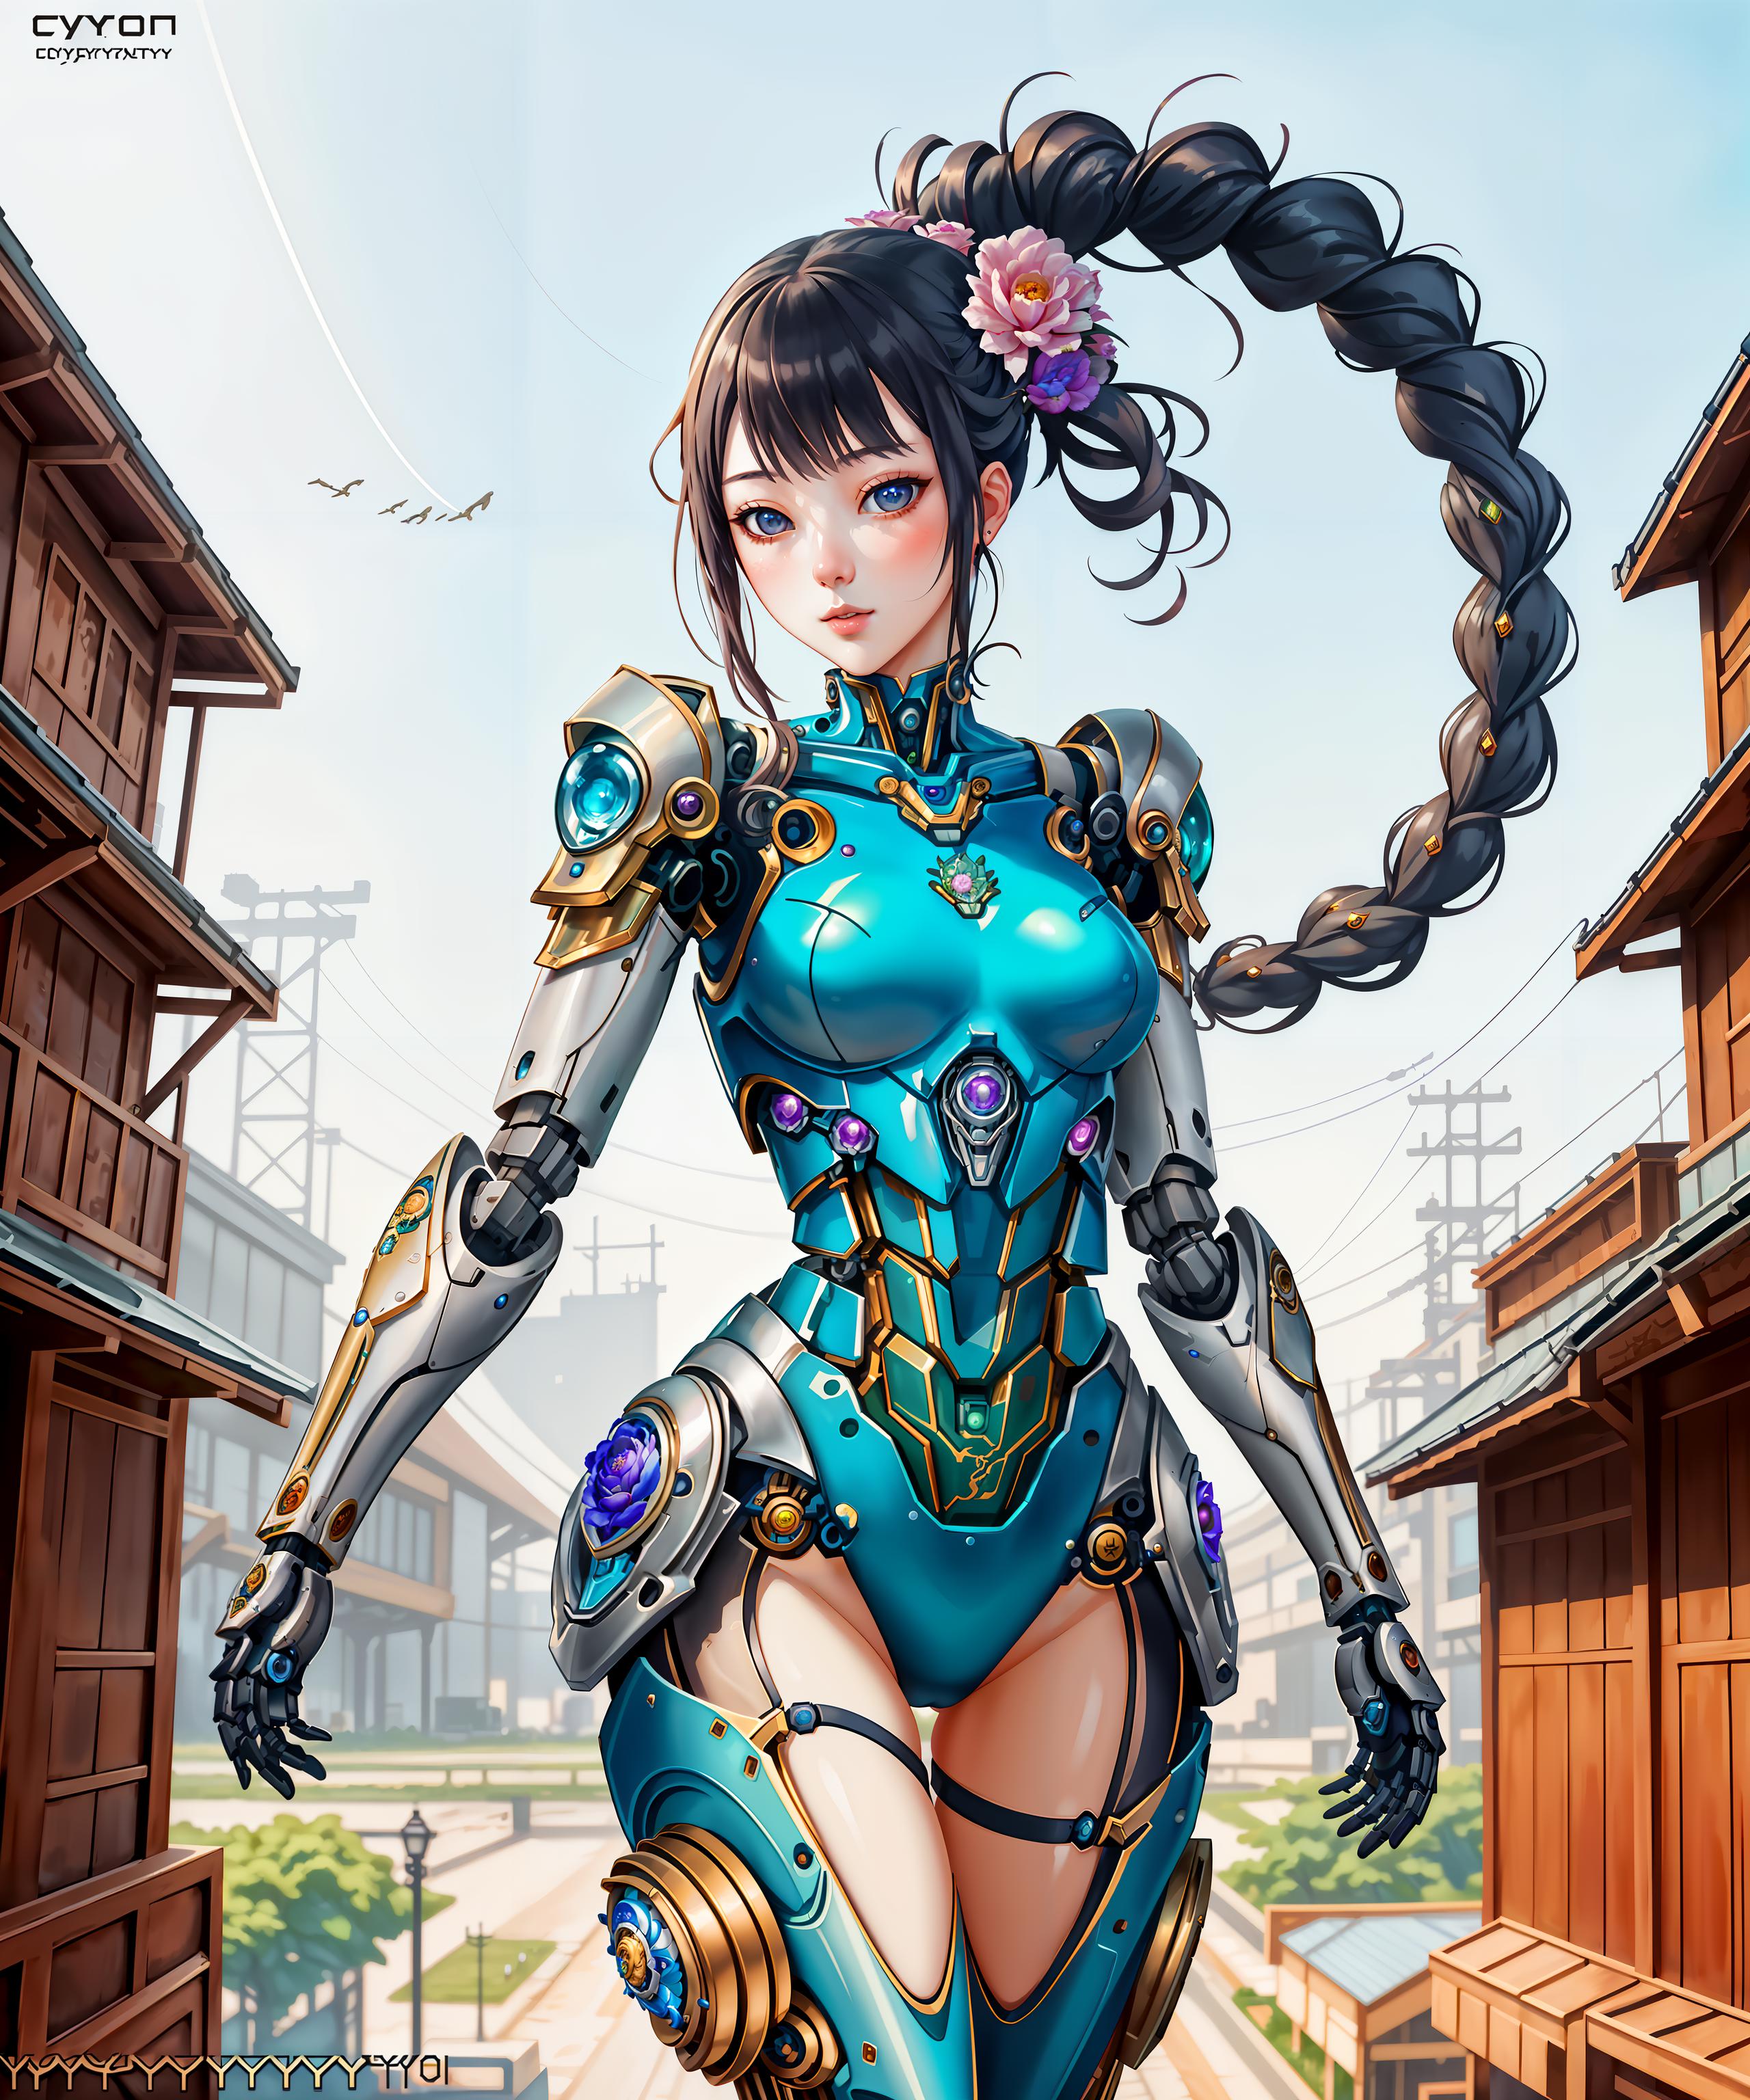 AI model image by mooncryptowow